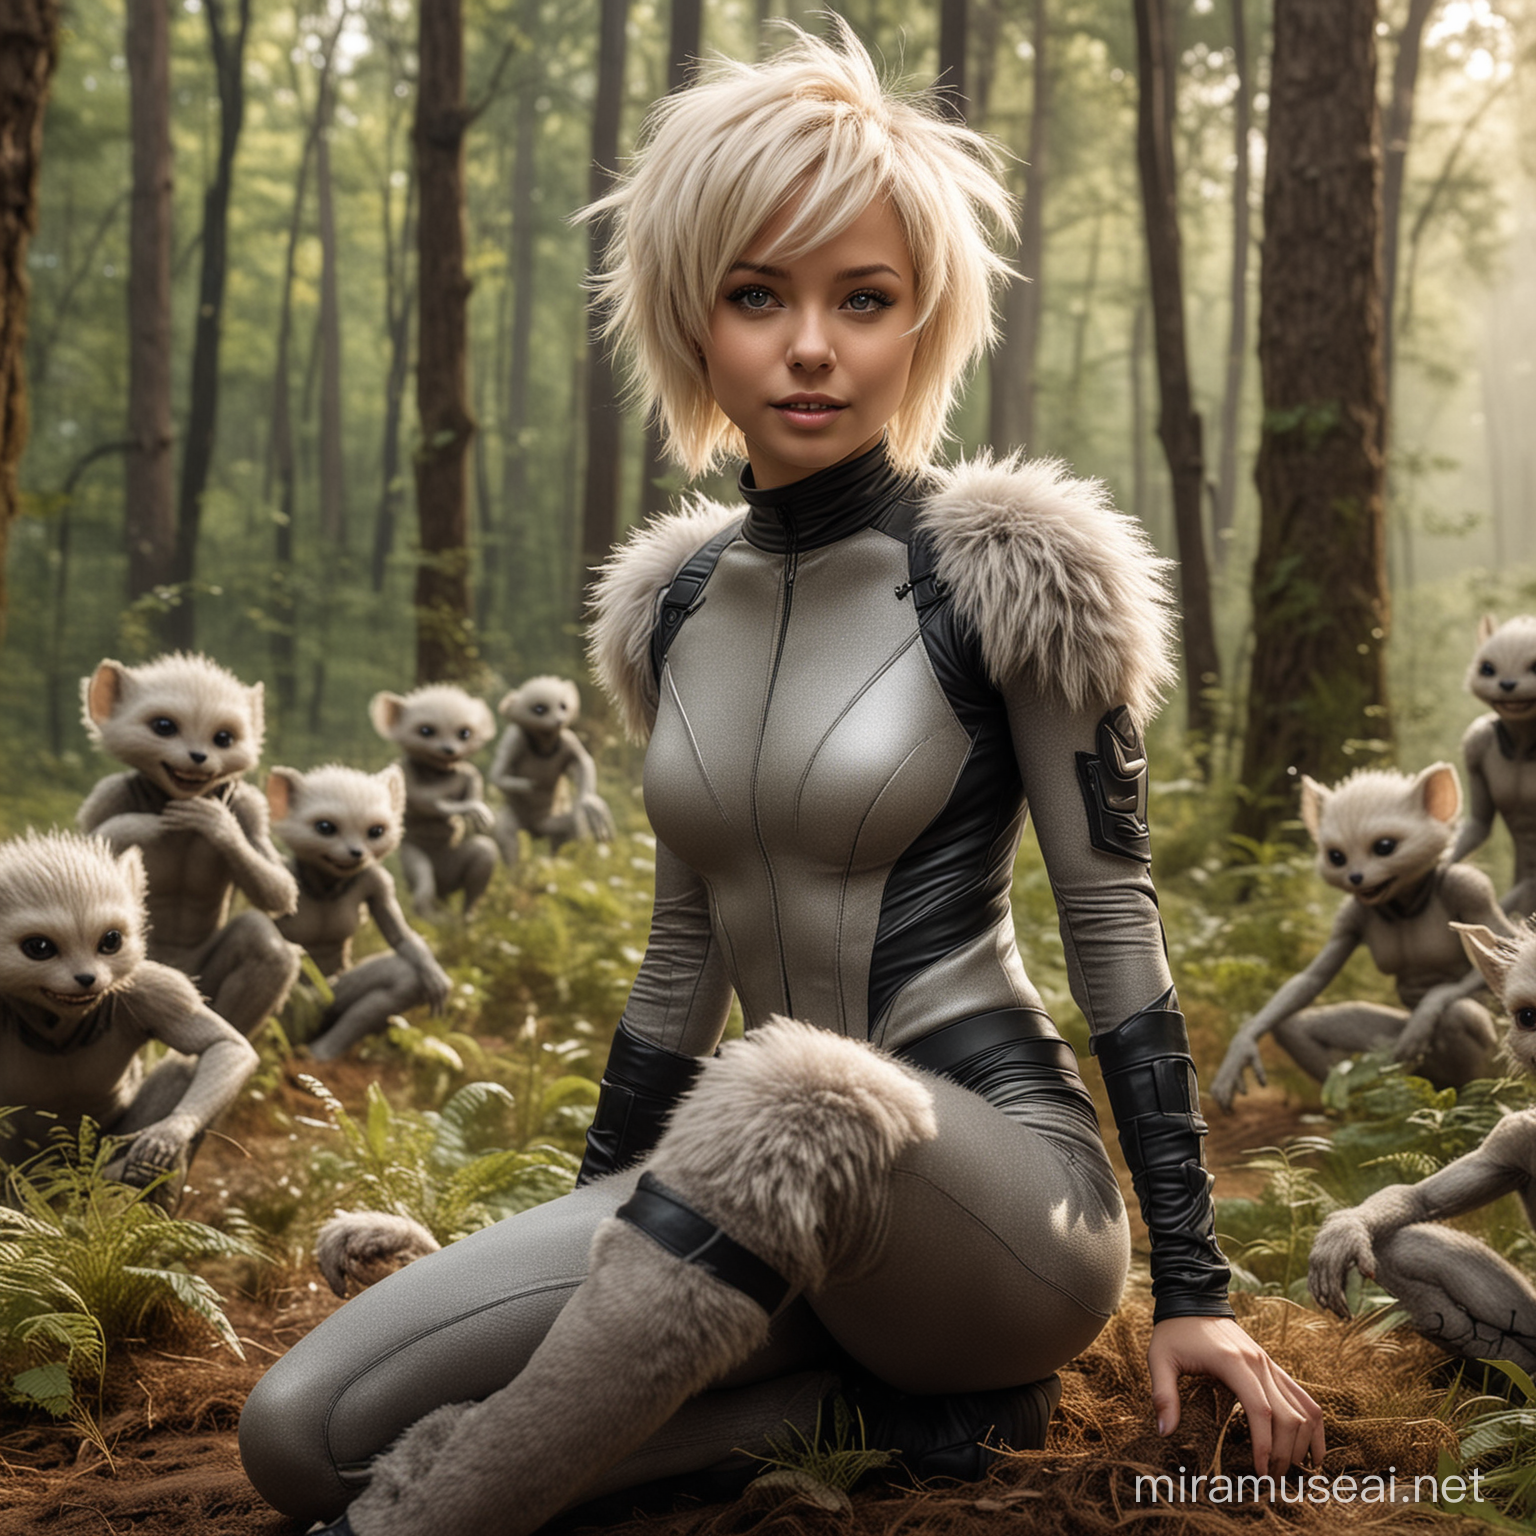 Beautiful petite female sitting as a bunch of furry little fuzz all aliens jump all over her, futuristic skin tight outfit, short blonde hair, tattoos, happy, woodland background, full body